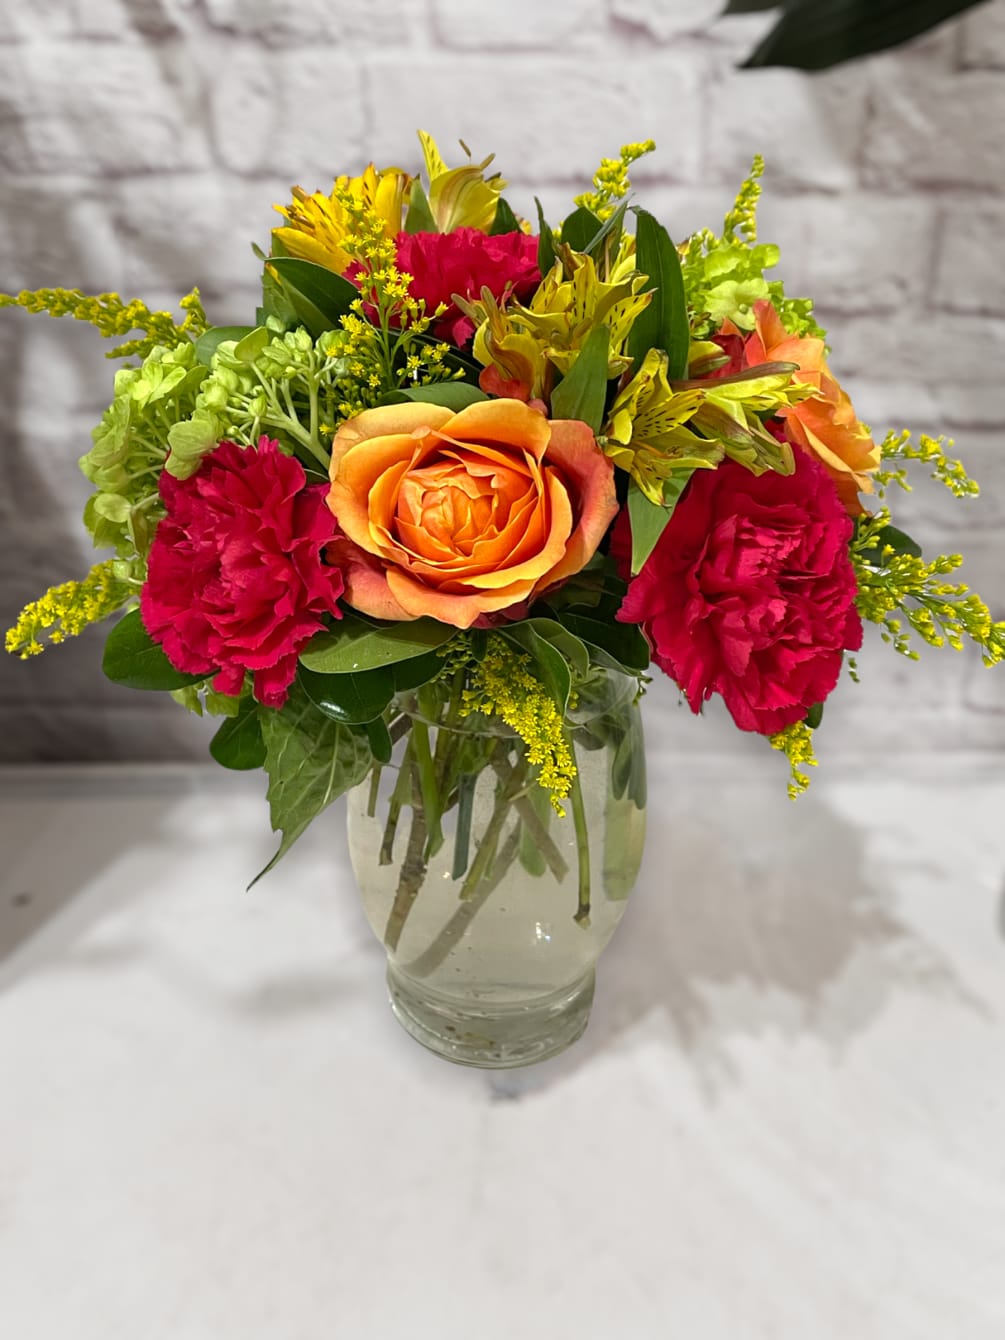 A beautiful and vibrant bouquet of flowers arranged in a glass vase.